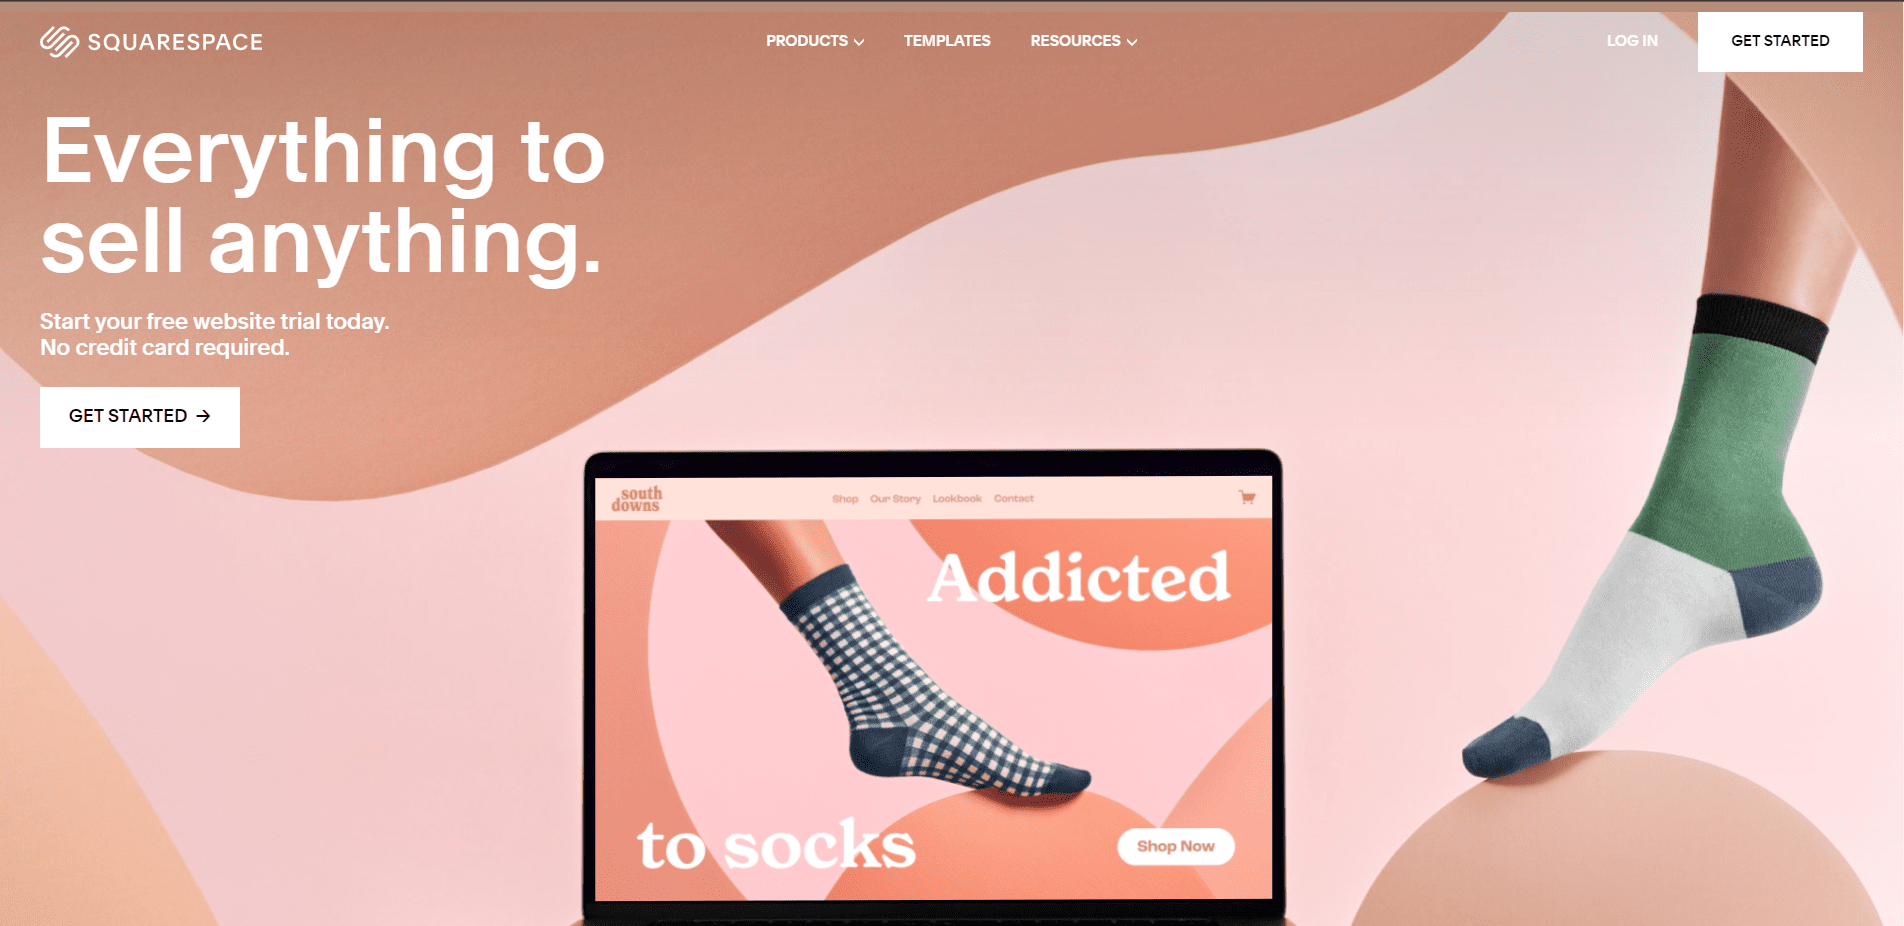 Squarespace — Best for social